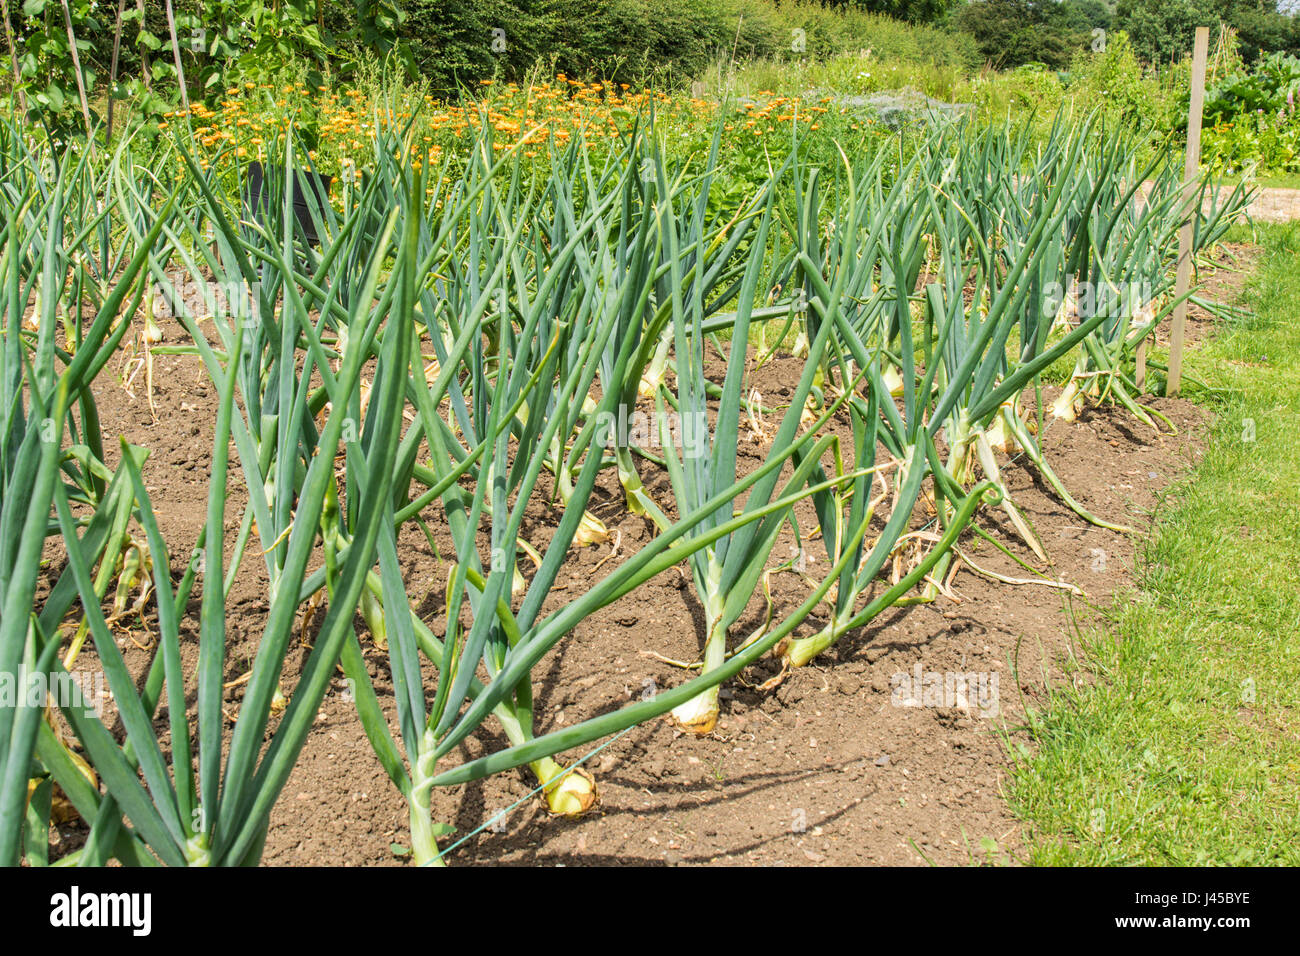 Onions growing in a row in a vegetable bed Stock Photo